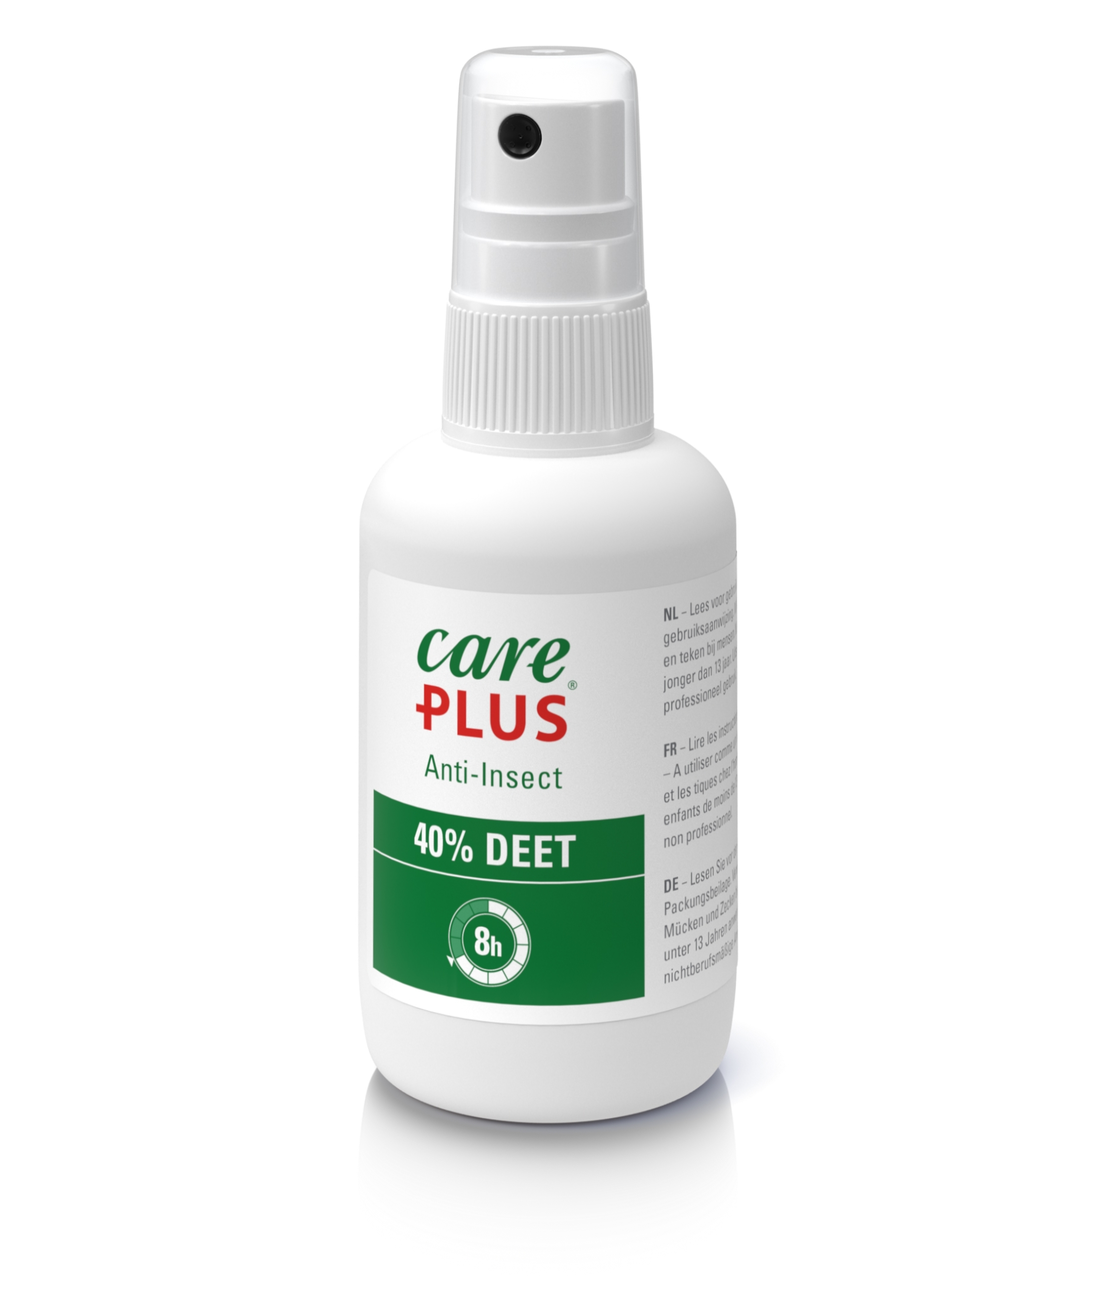 Anti-Insect DEET 40 % Spray